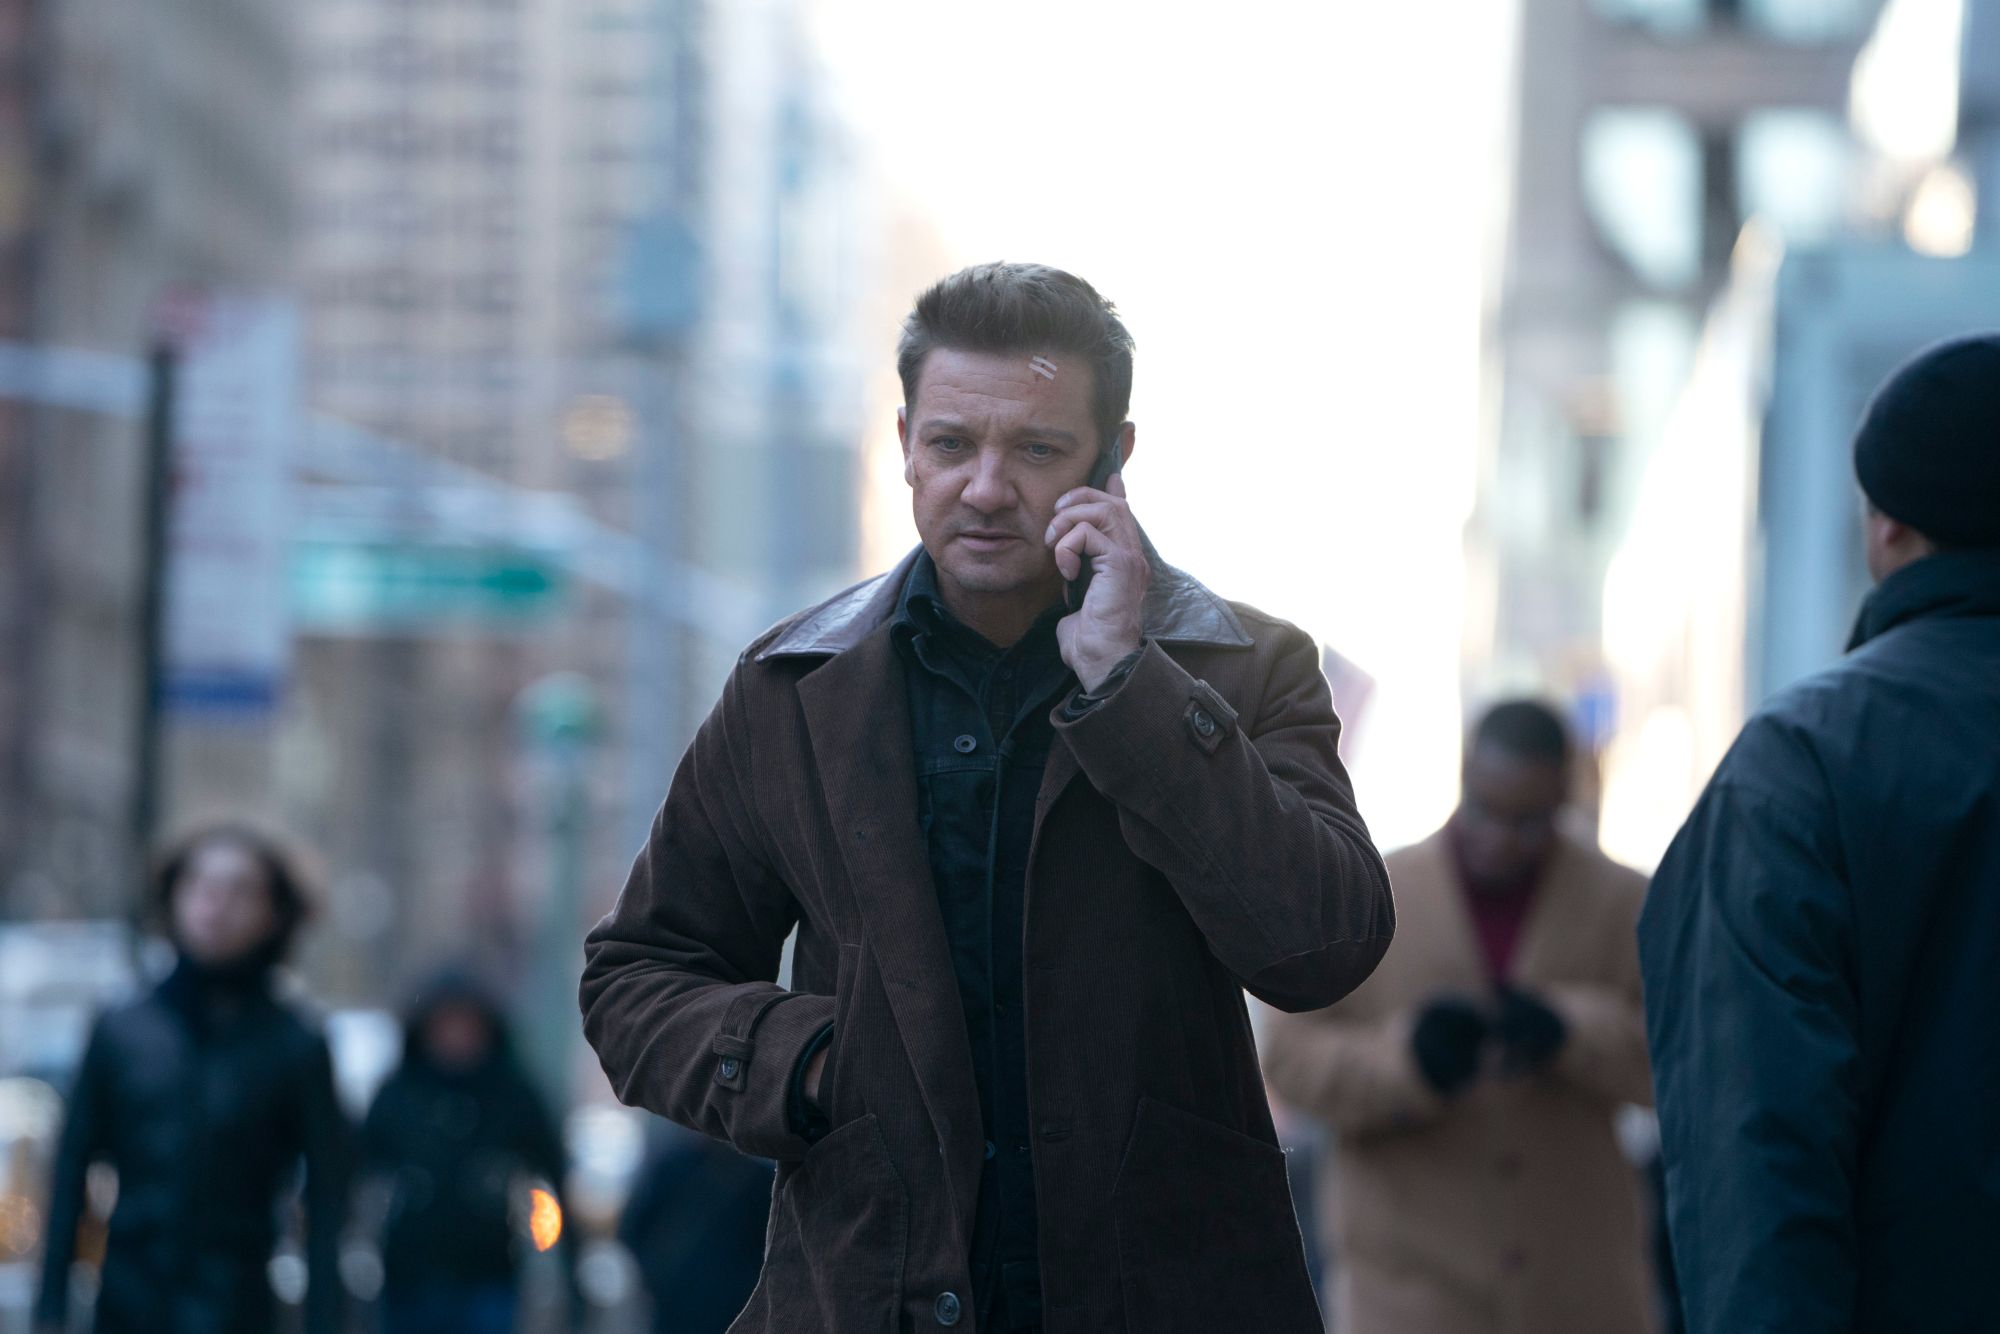 Jeremy Renner portrayed the role of Hawkeye